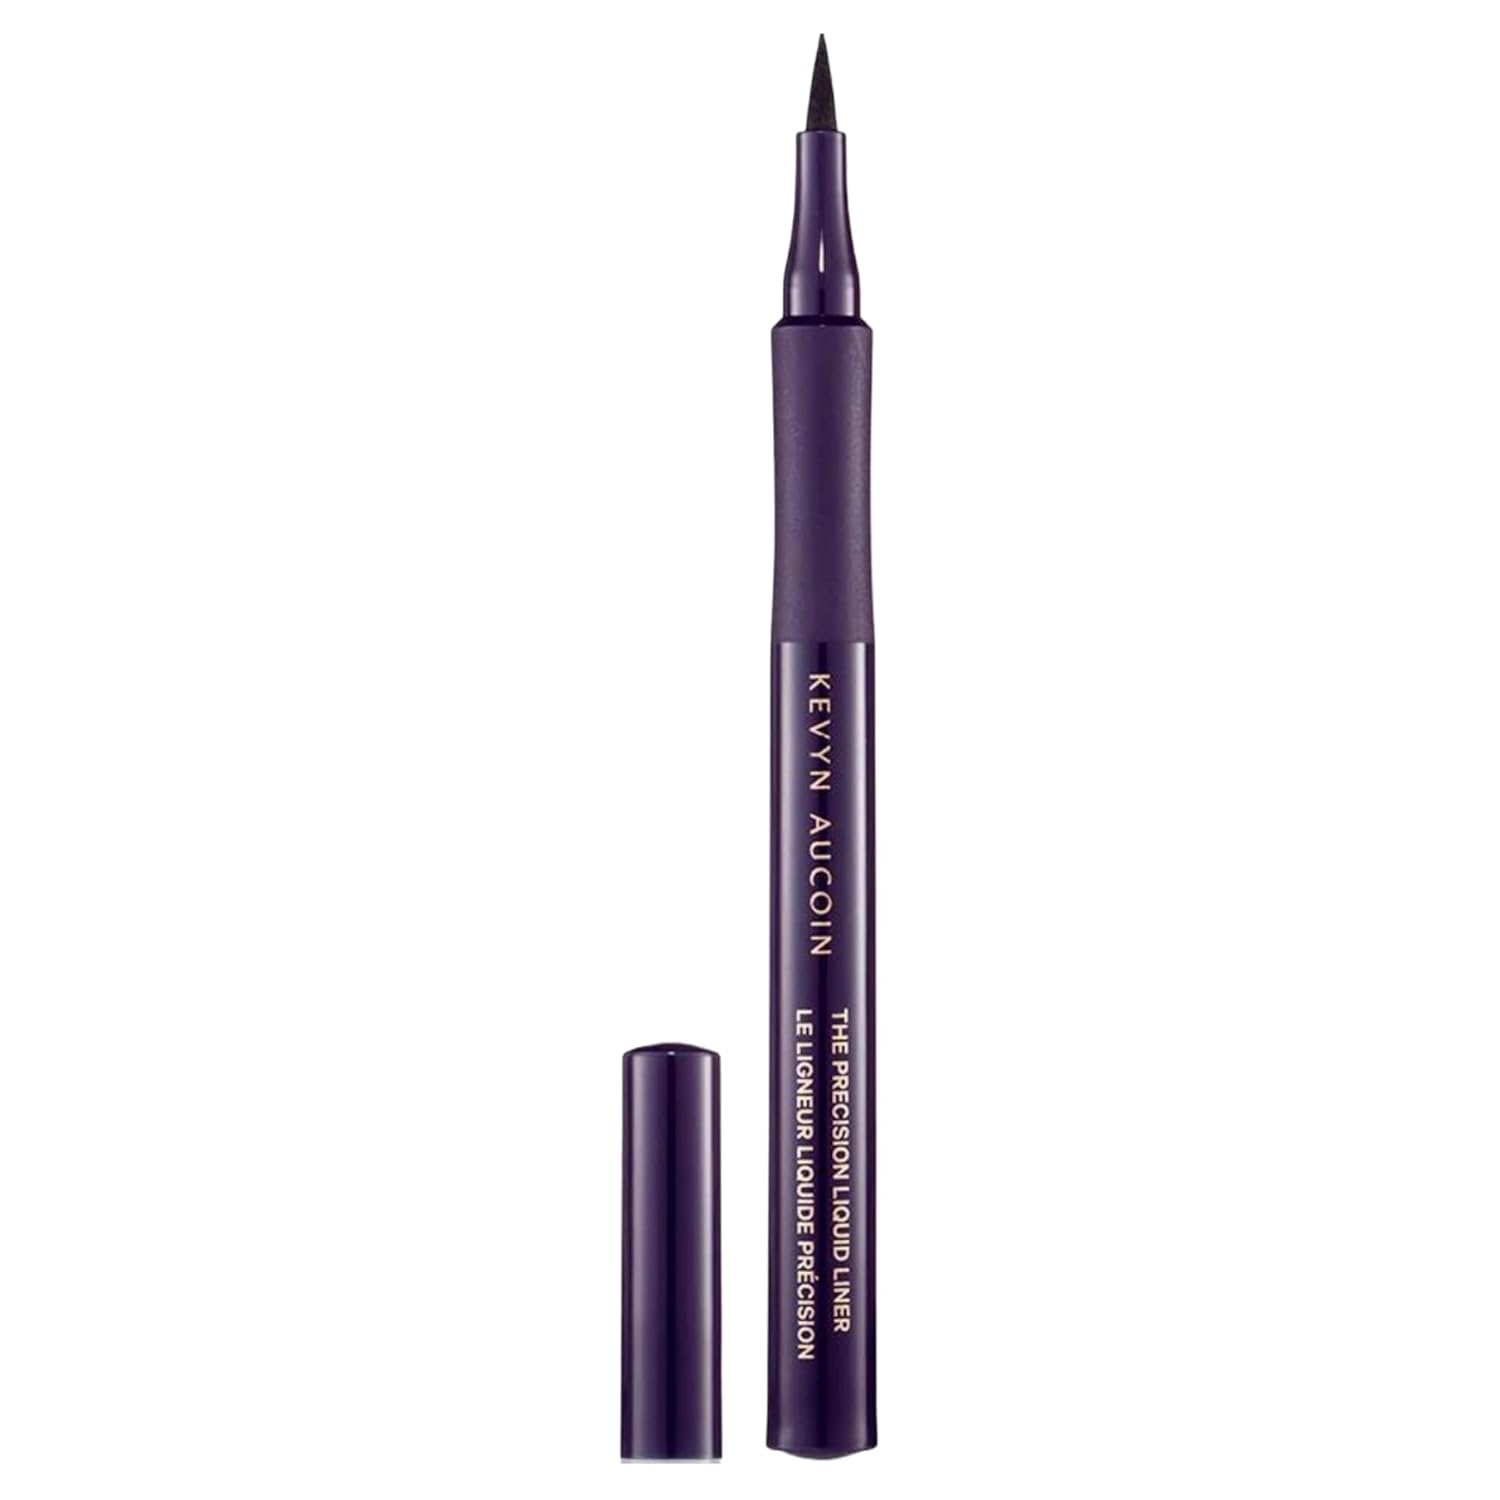 Kevyn Aucoin The Precision Liquid Liner, Black: Easy use with a glide-on felt tip eyeliner. Ultrafine precise applicator for sharp lines. Light to heavy application. Smudge-proof. All day long wear